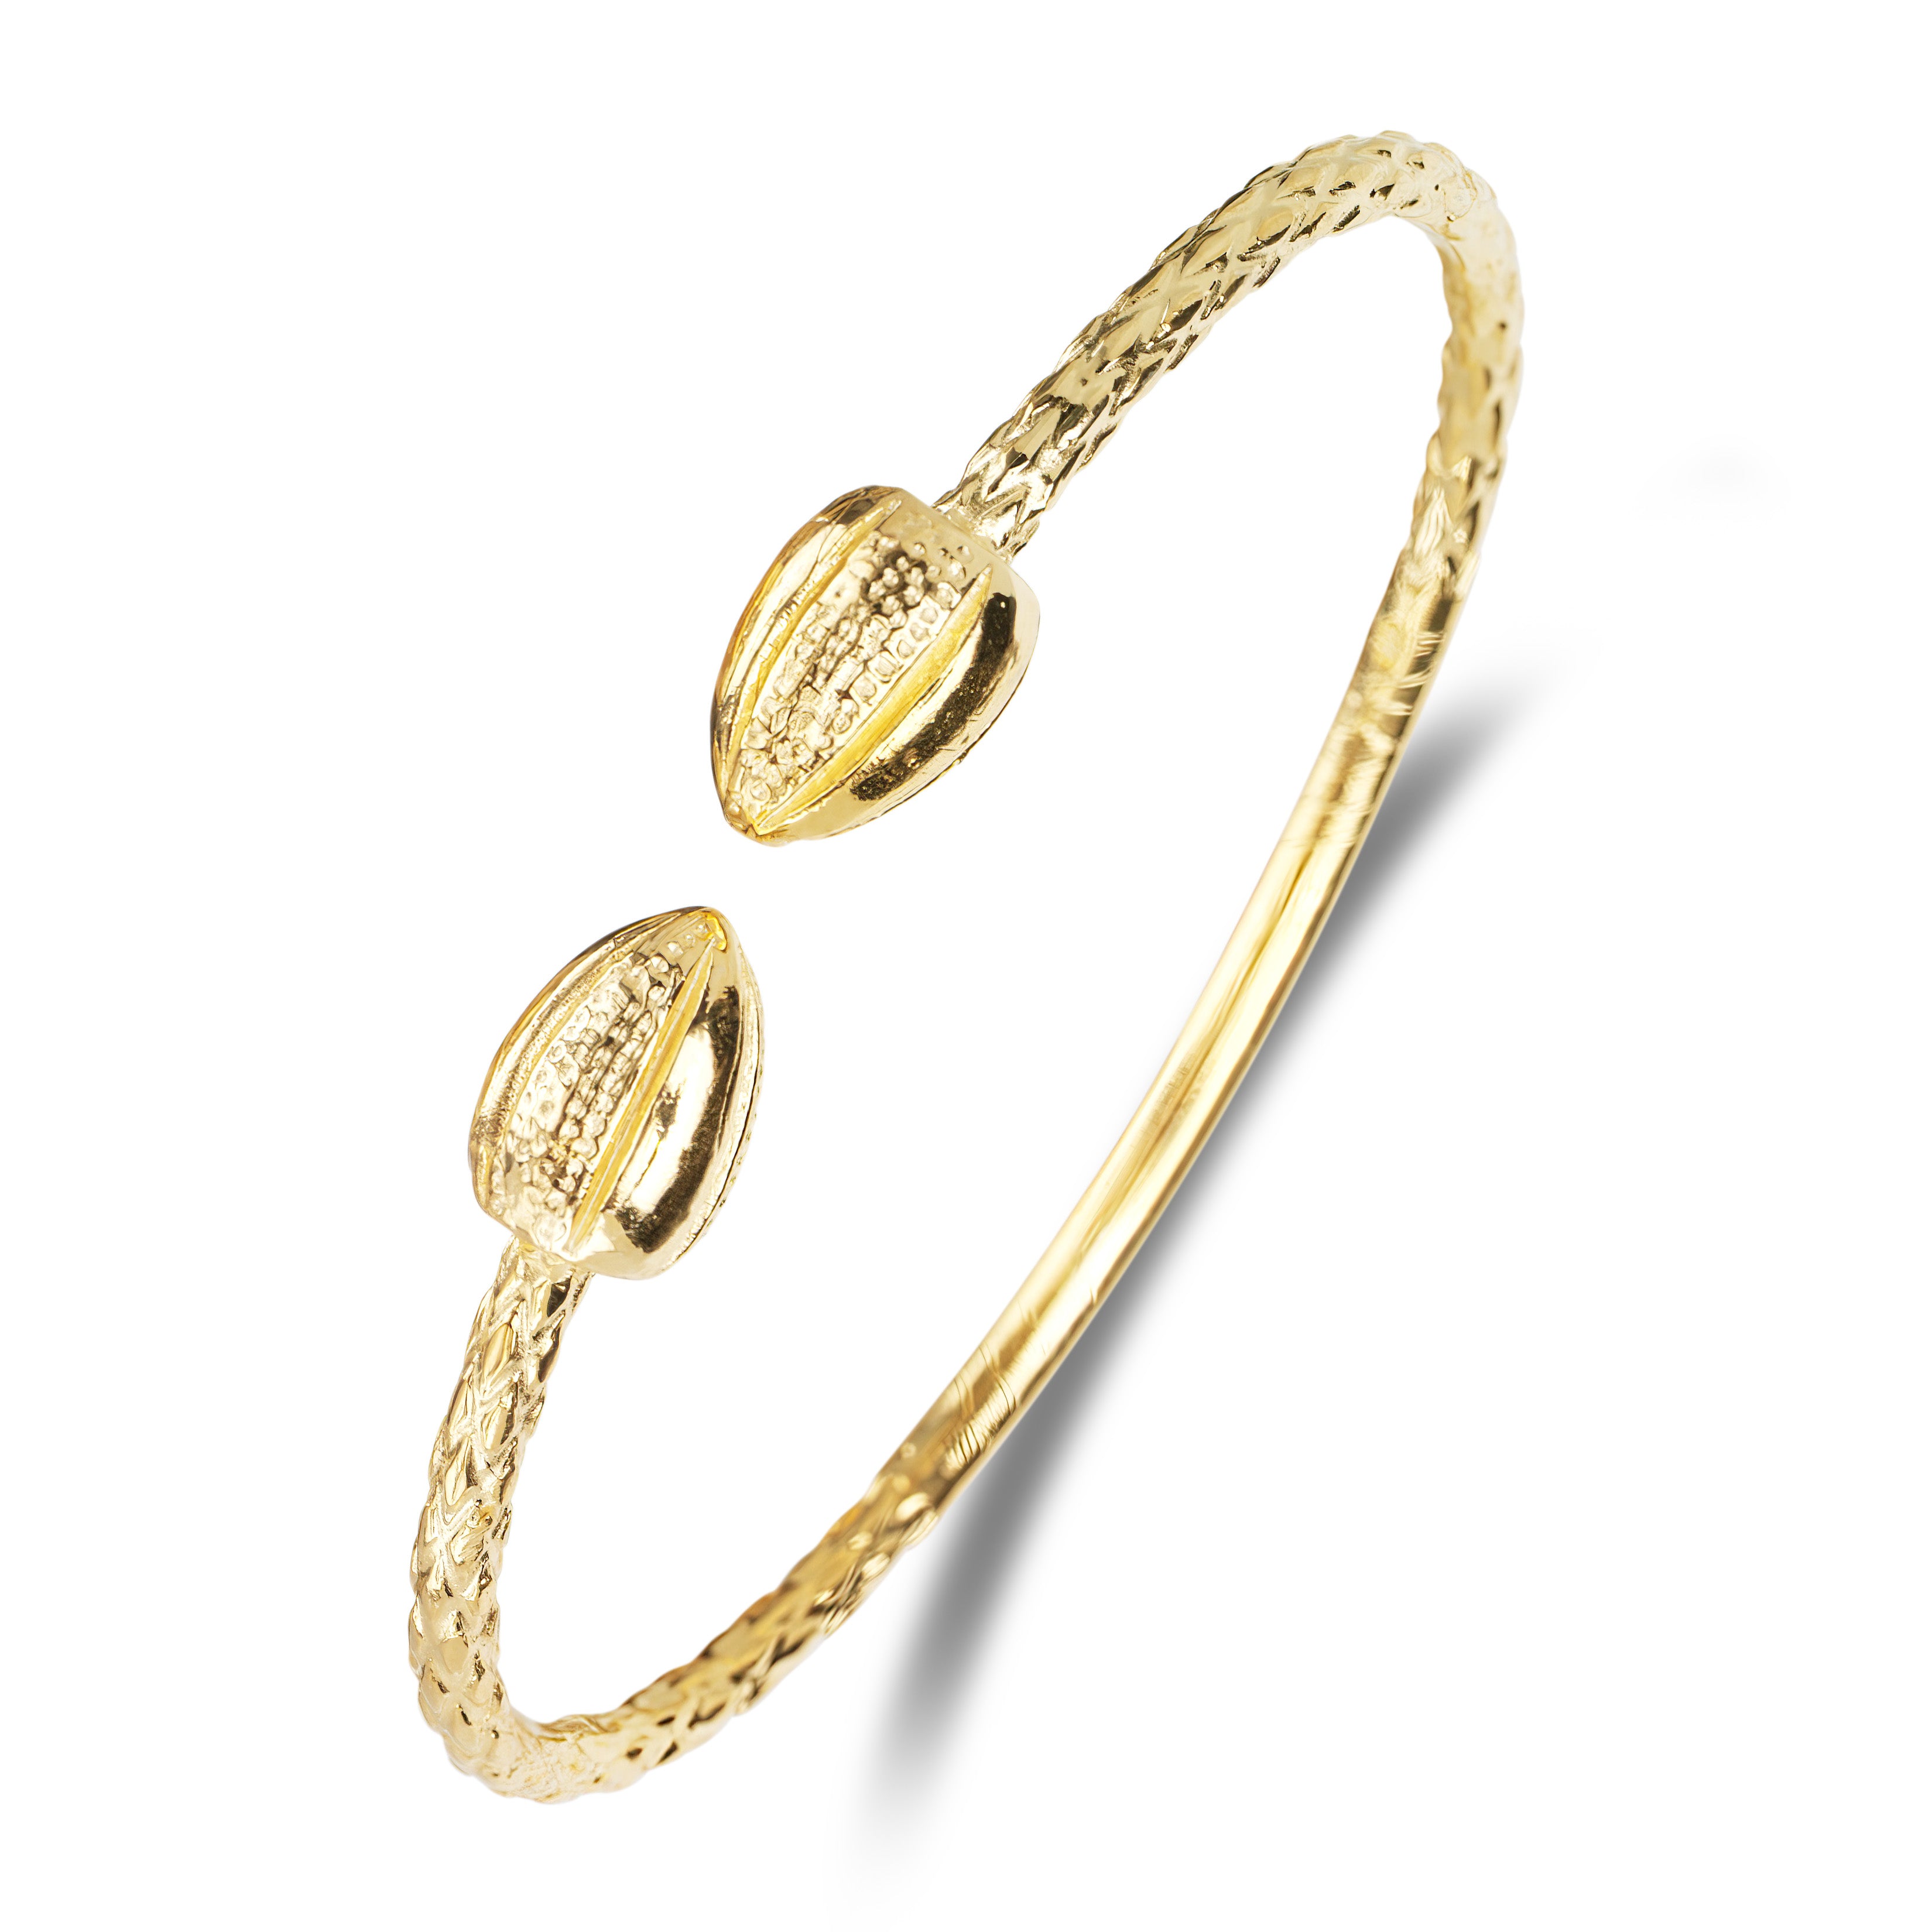 Indian gold plated bracelet 2,9 inches | Jamini